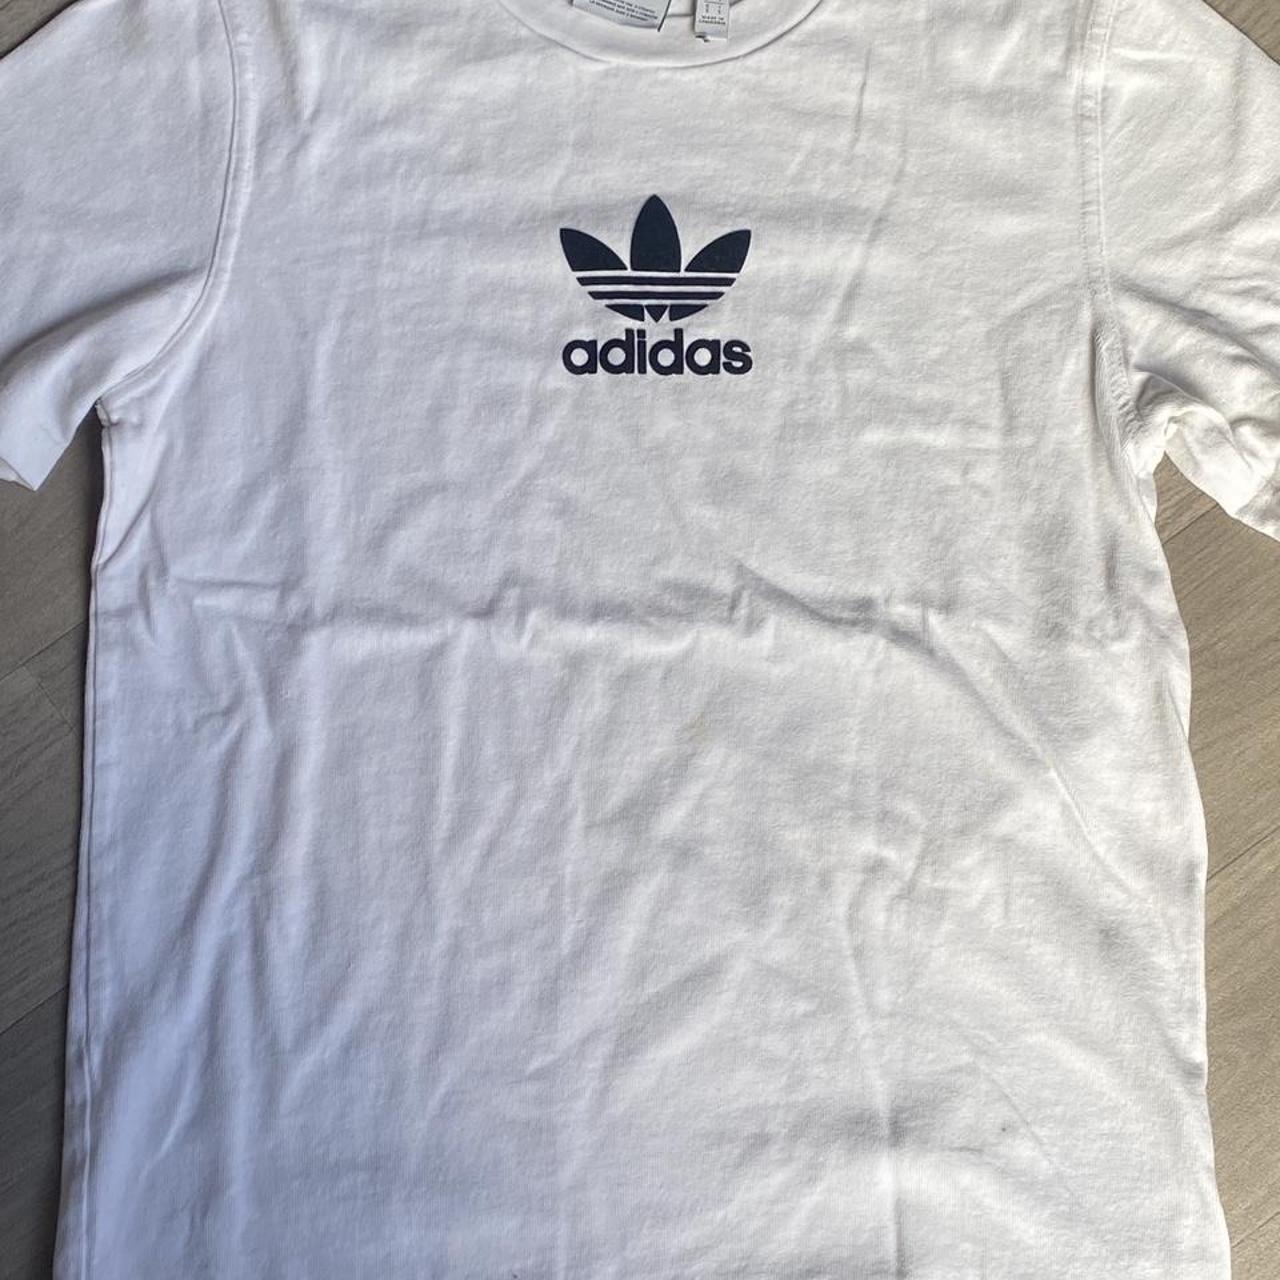 Adidas t shirt Size small and fits tts Velour... - Depop